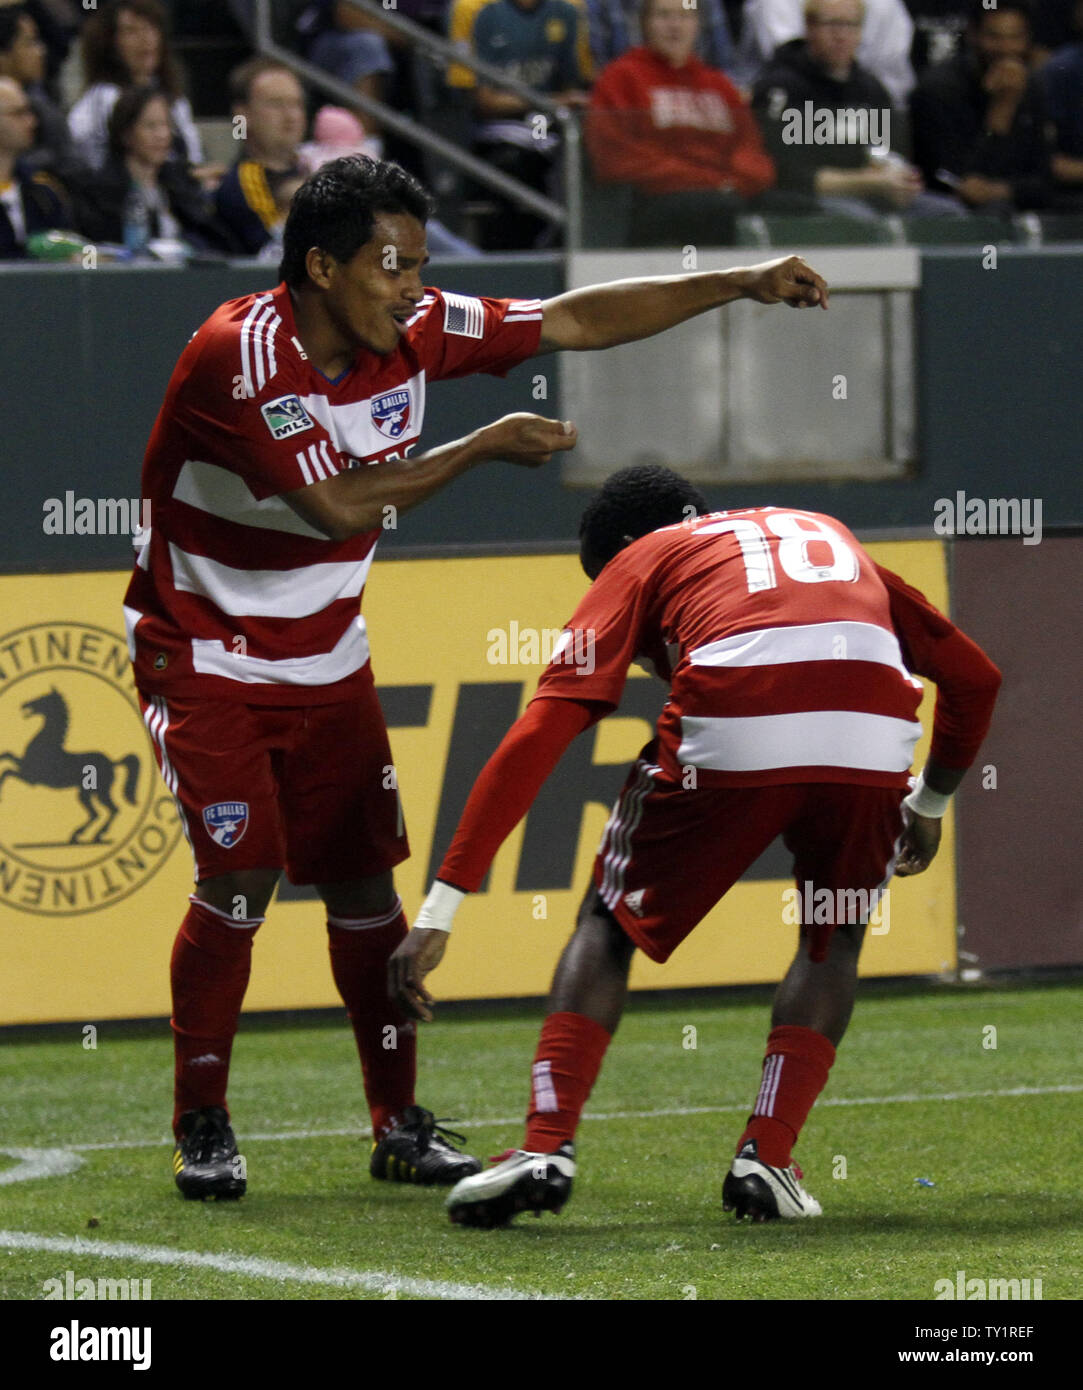 FC Dallas midfielder/forward David Ferreira, left, and  FC Dallas midfielder Marvin Chavez (18)  celebrate after Ferreira scored a goal in the Western Conference Fiinal playoff game at the Home Depot Center in Carson, California on Nov. 14, 2010.    UPI/Lori Shepler. Stock Photo